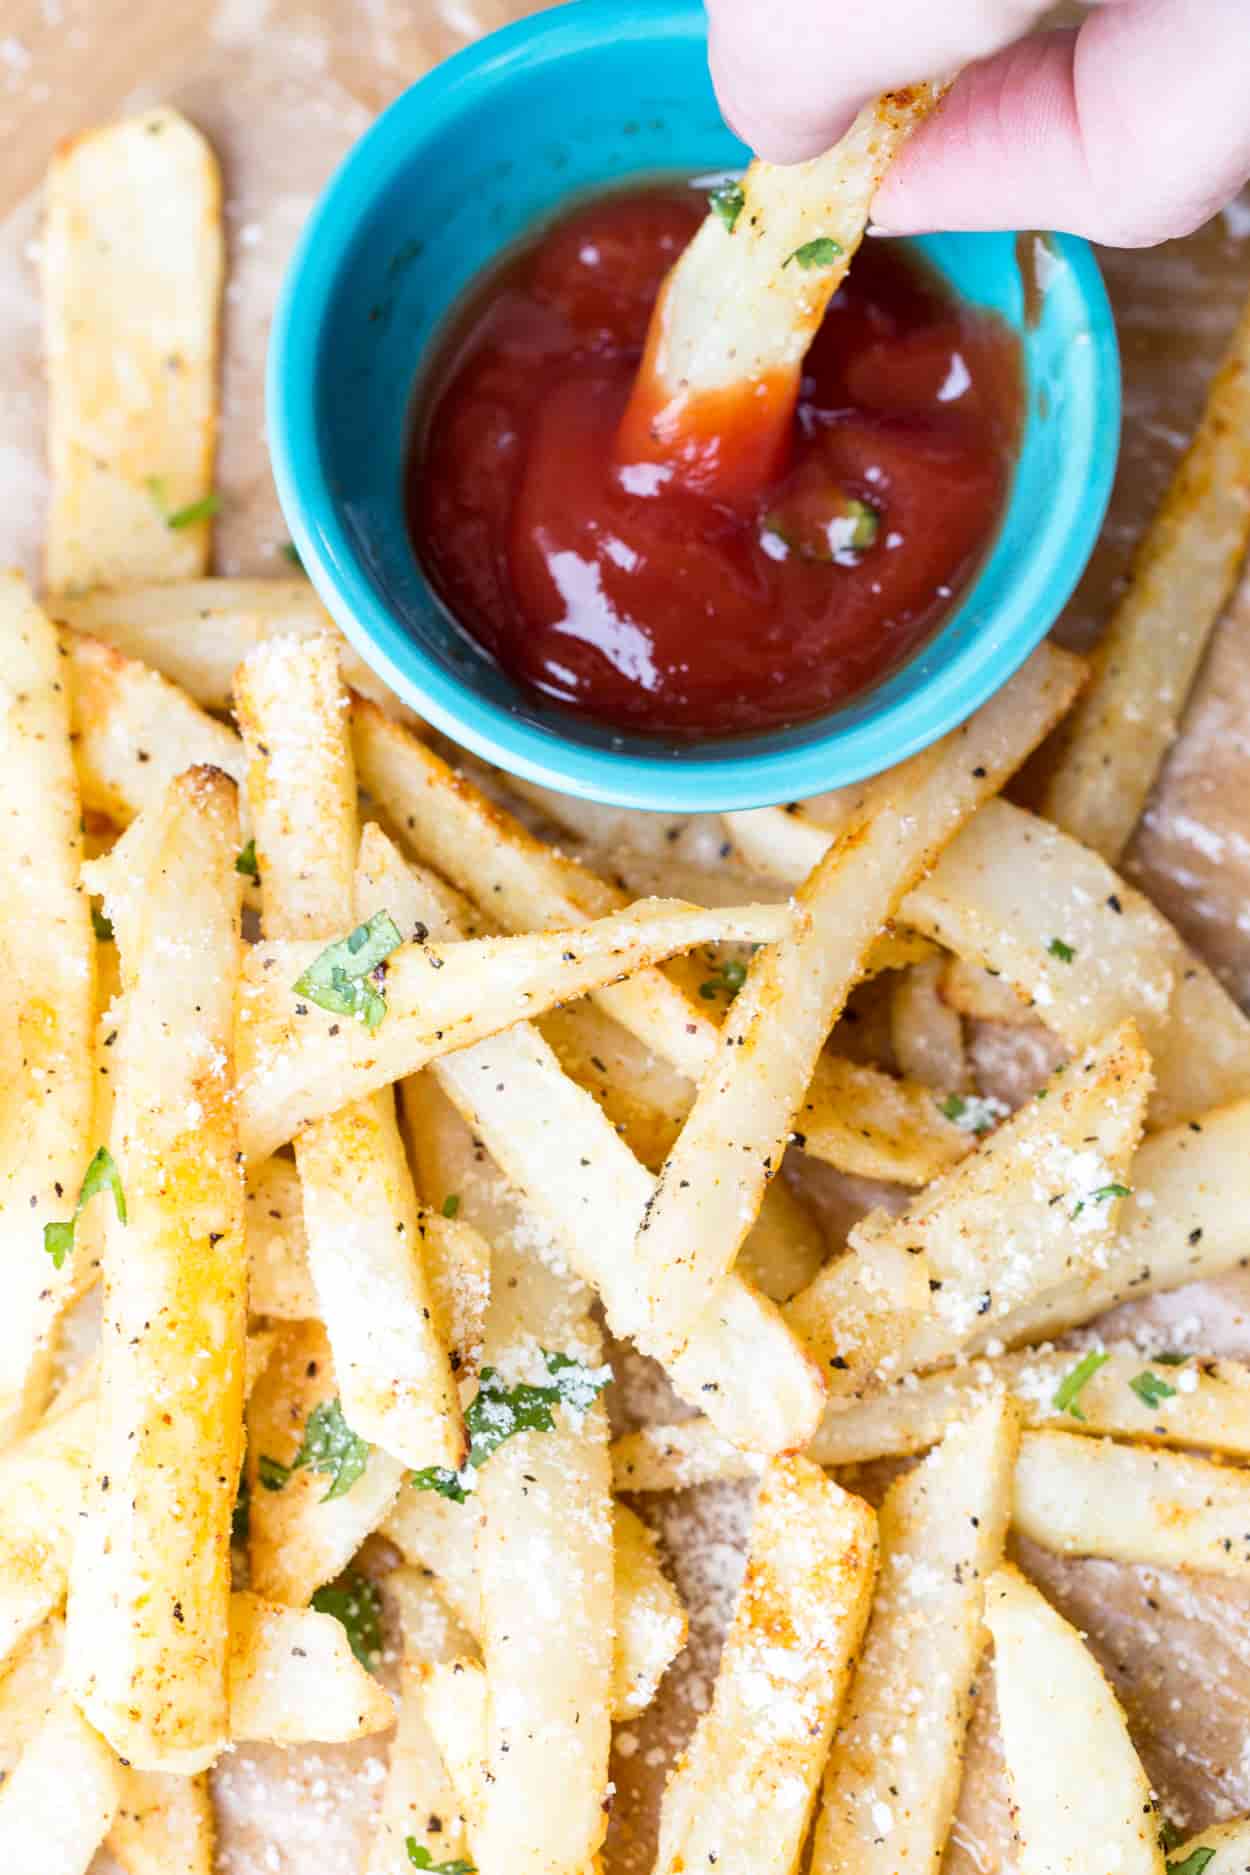 French fries topped with greens and parmesan cheese, dipped into ketchup.